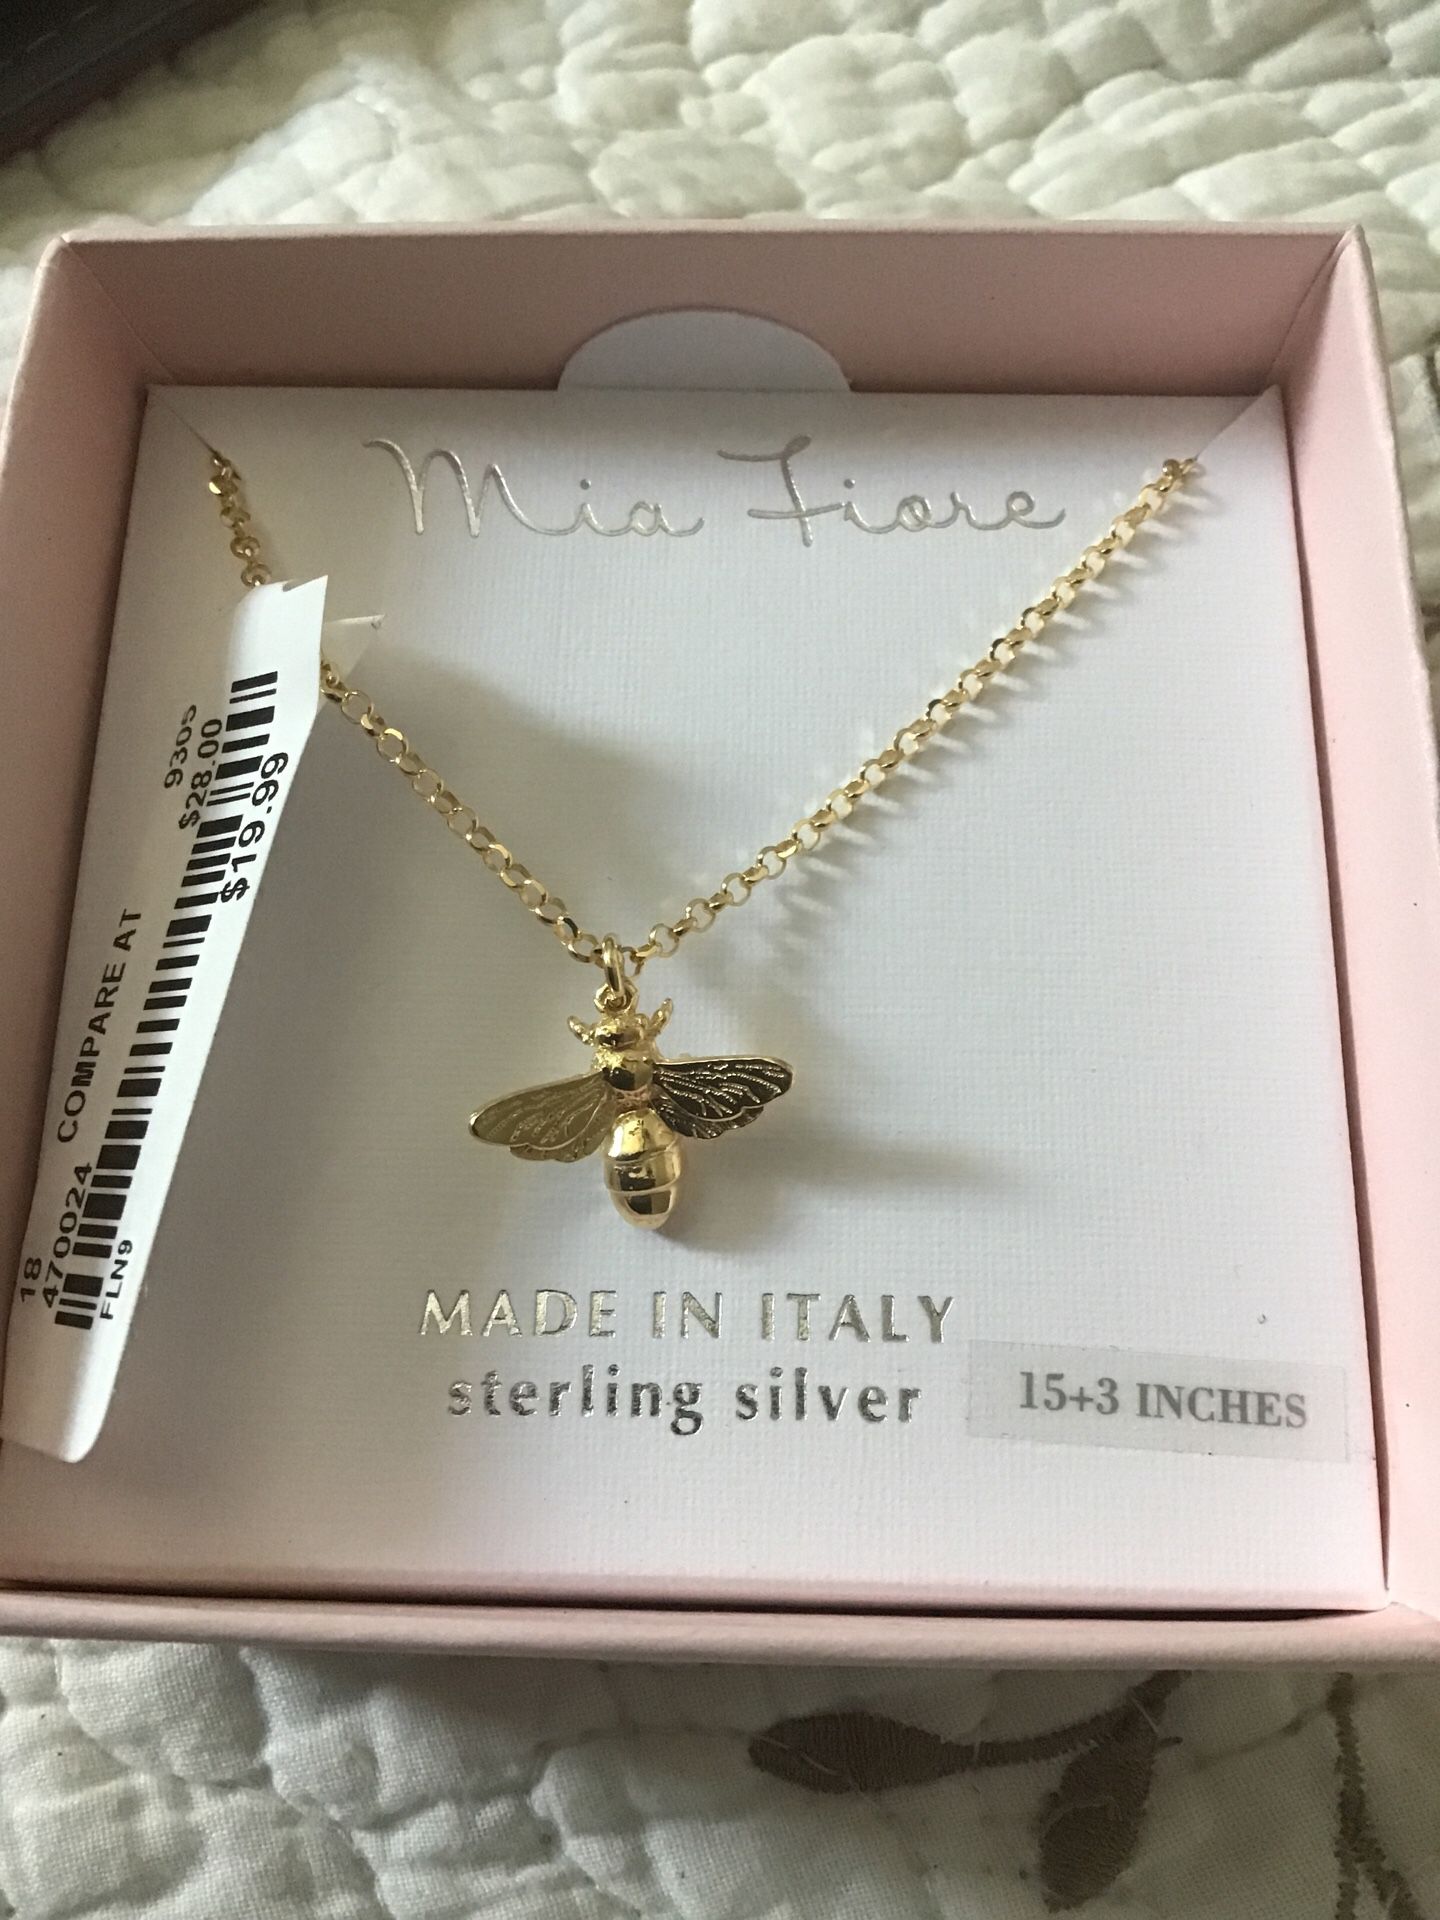 By. MIA. FIARE. STERLING SILVER NECKLACE WITH FLY PENDANT